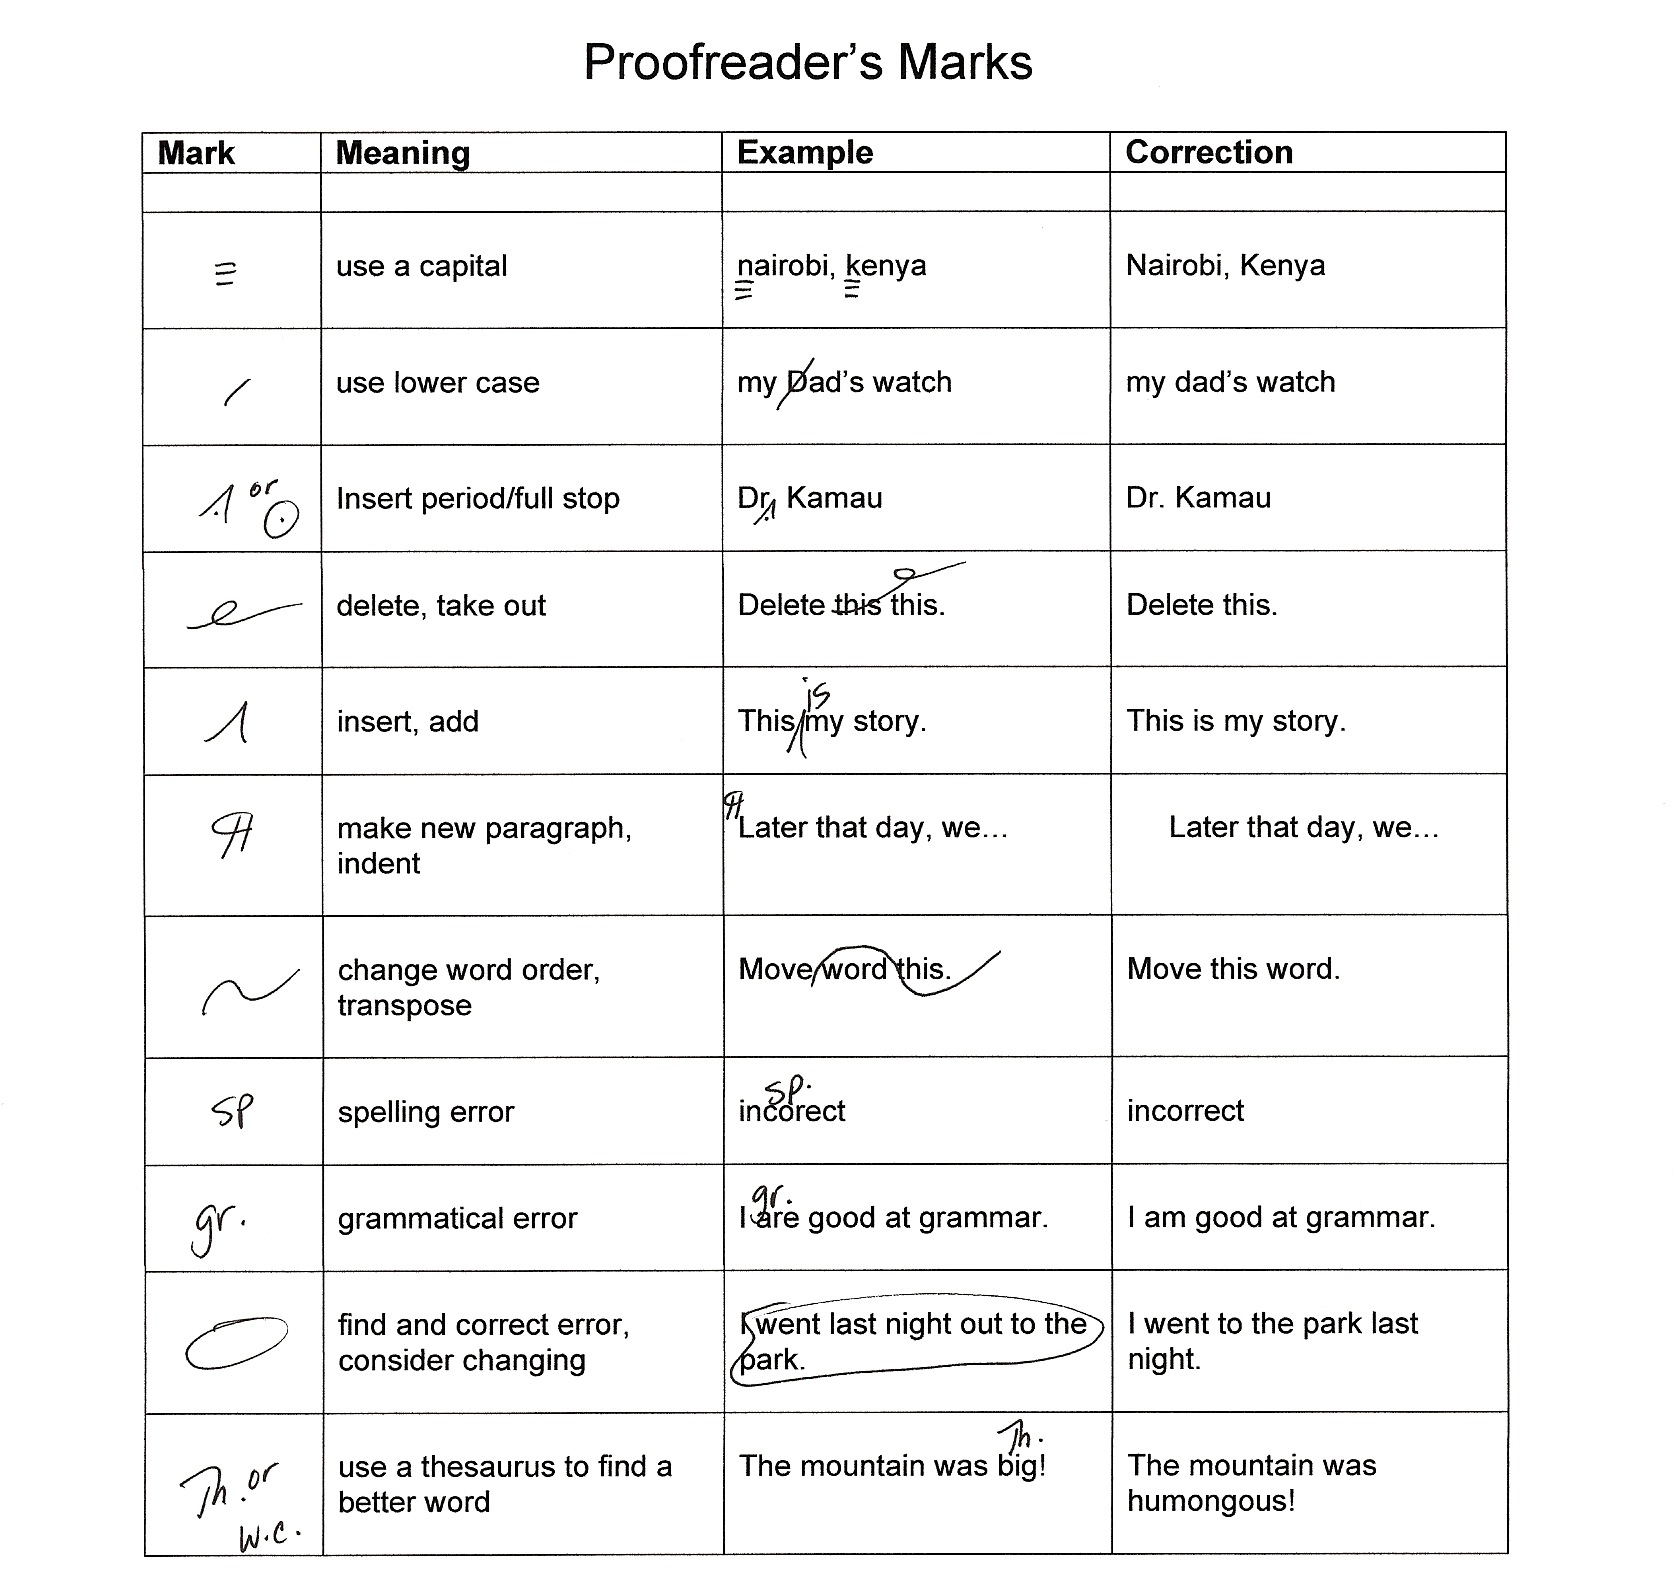 Proofreading marks handout